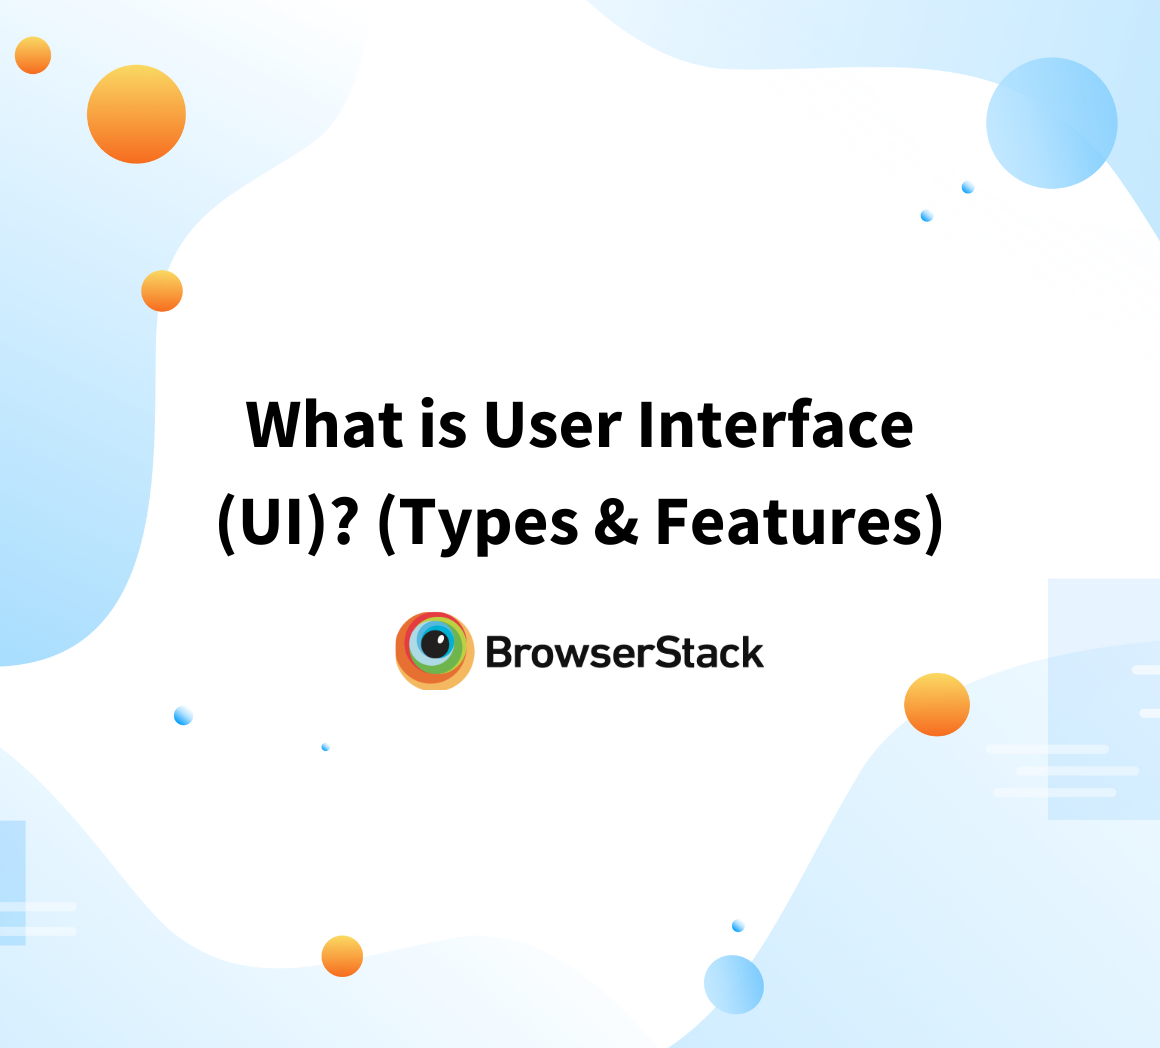 What is User Interface (UI)? (Types & Features)